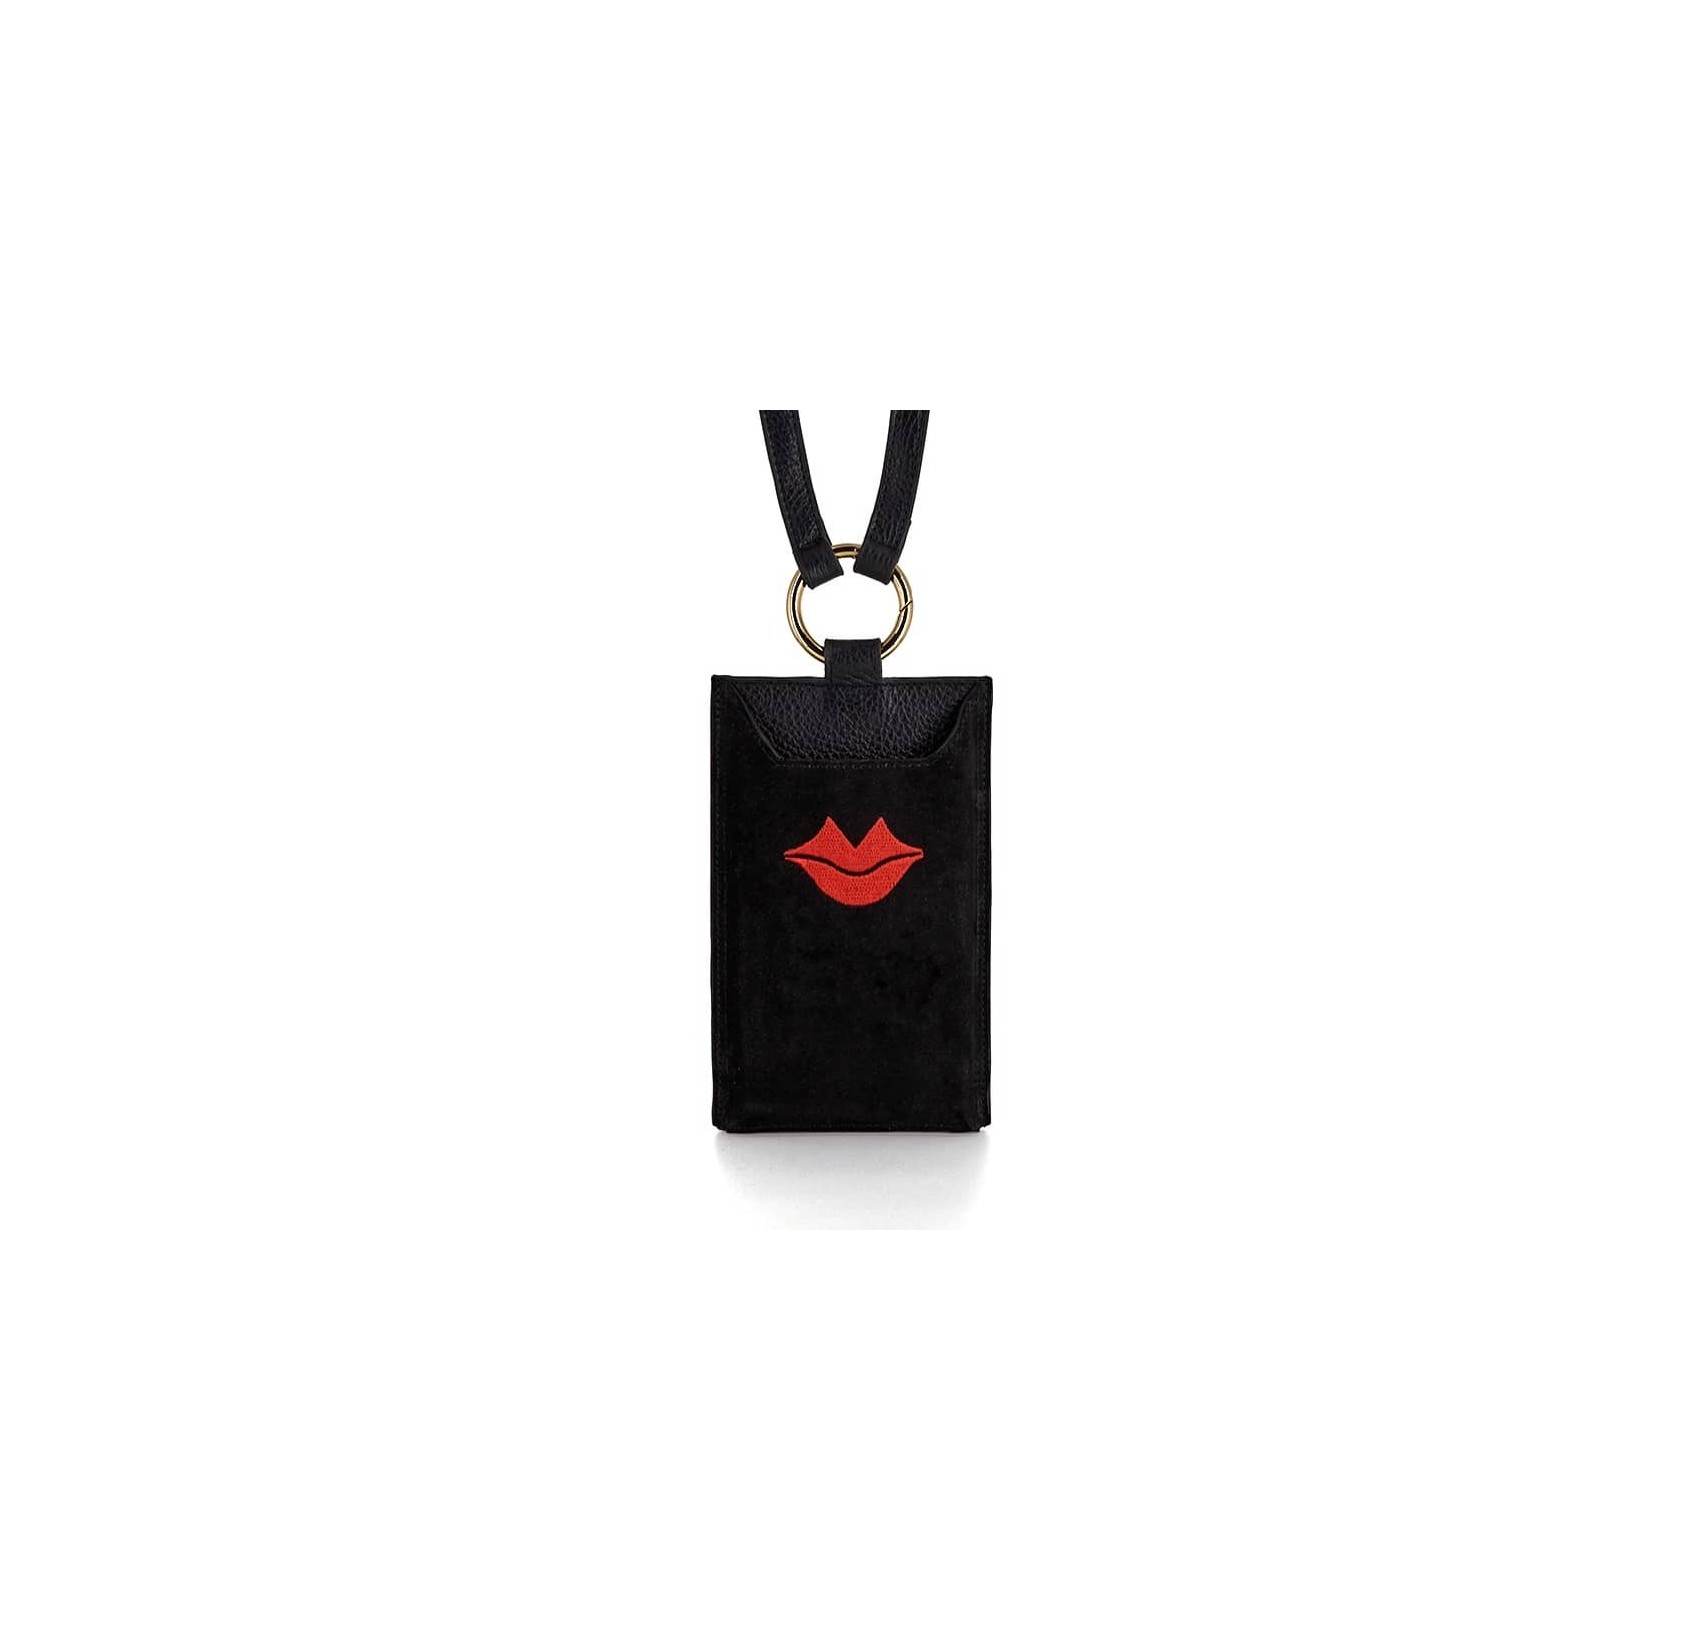 Black and red velvet leather TELI phone pouch, front view | Gloria Balensi